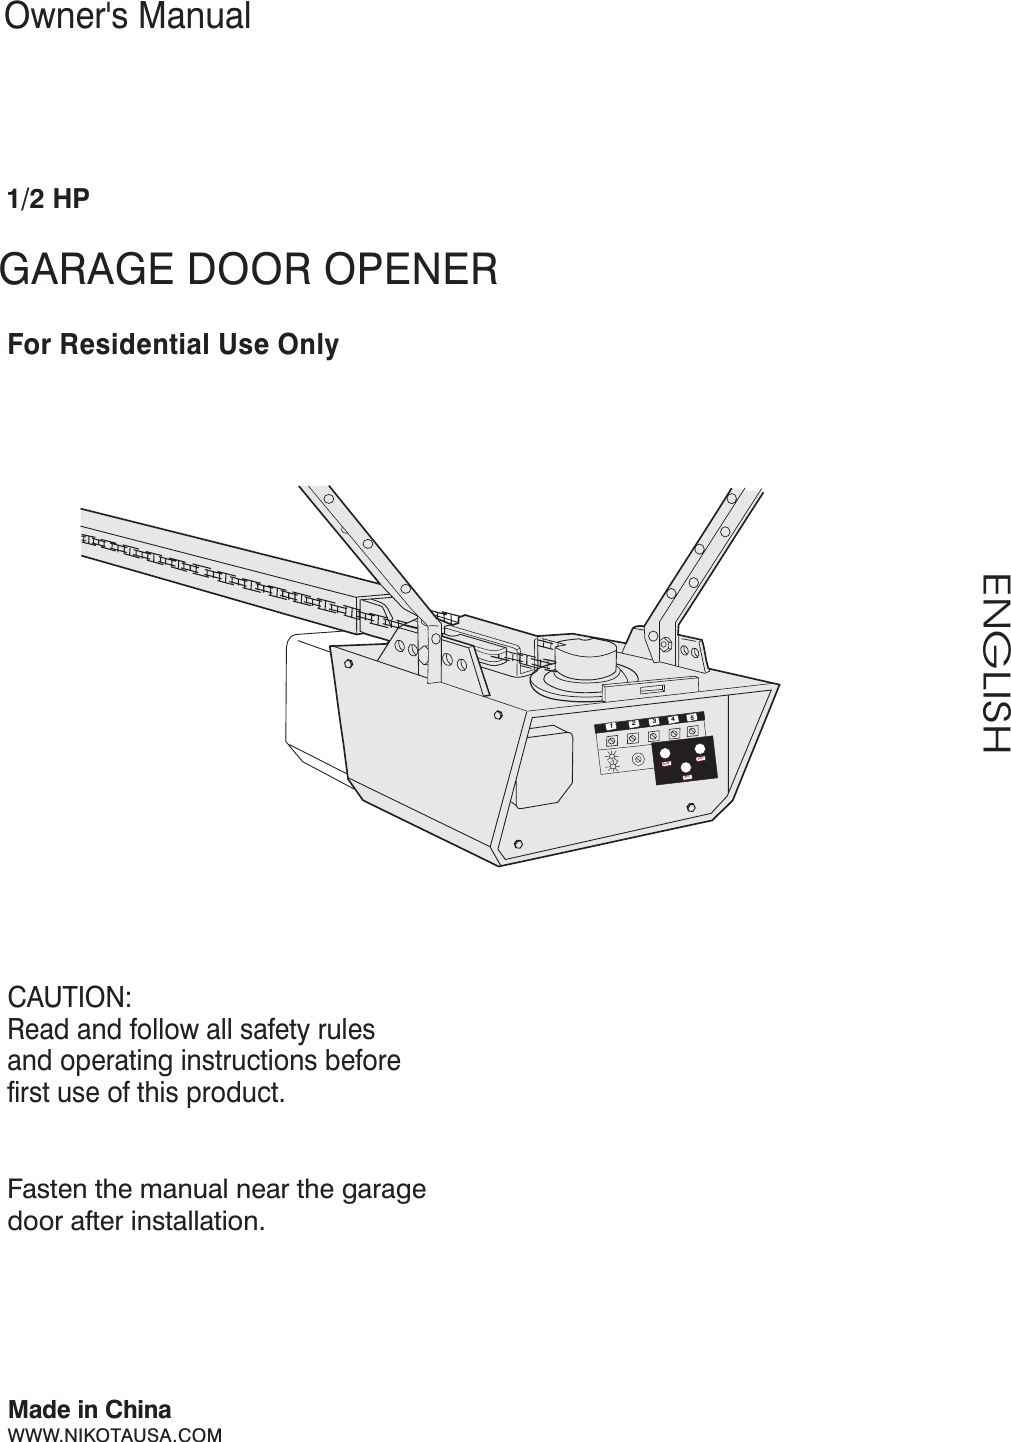 Owner&apos;s Manual1/2 HPGARAGE DOOR OPENERFor Residential Use OnlyENGLISHCAUTION:Read and follow all safety rulesand operating instructions beforefirst use of this product.Fasten the manual near the garagedoor after installation.Made in ChinaWWW.NIKOTAUSA.COM12345WORKSHIFTYAKO